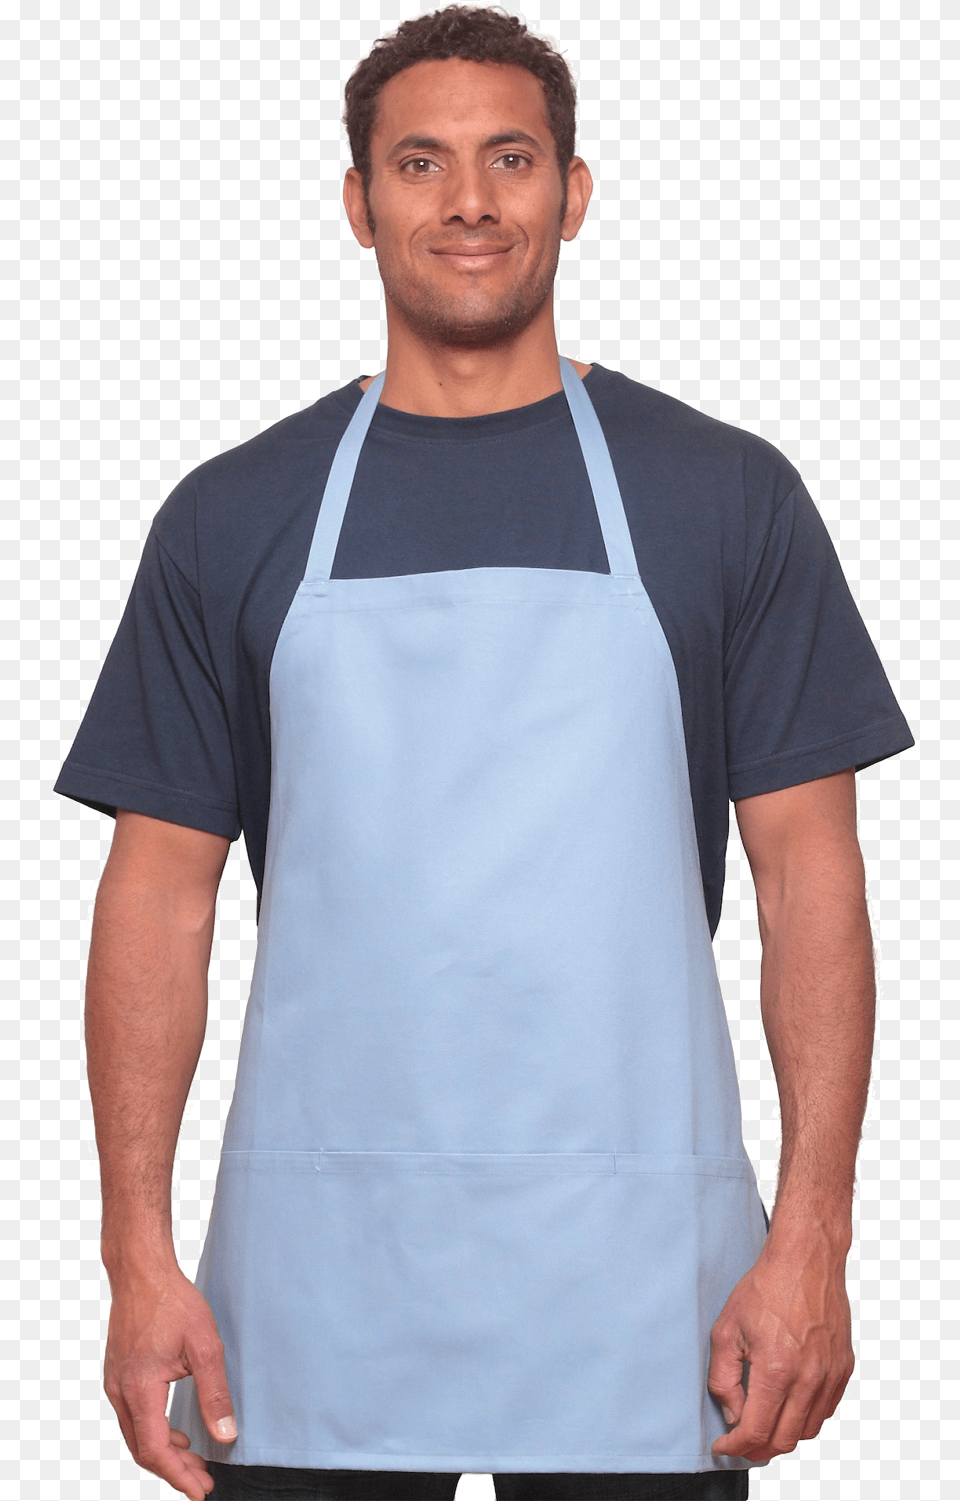 Hae Now Napa 2185 Unisex Apron Pocket, Adult, Clothing, Male, Man Free Png Download